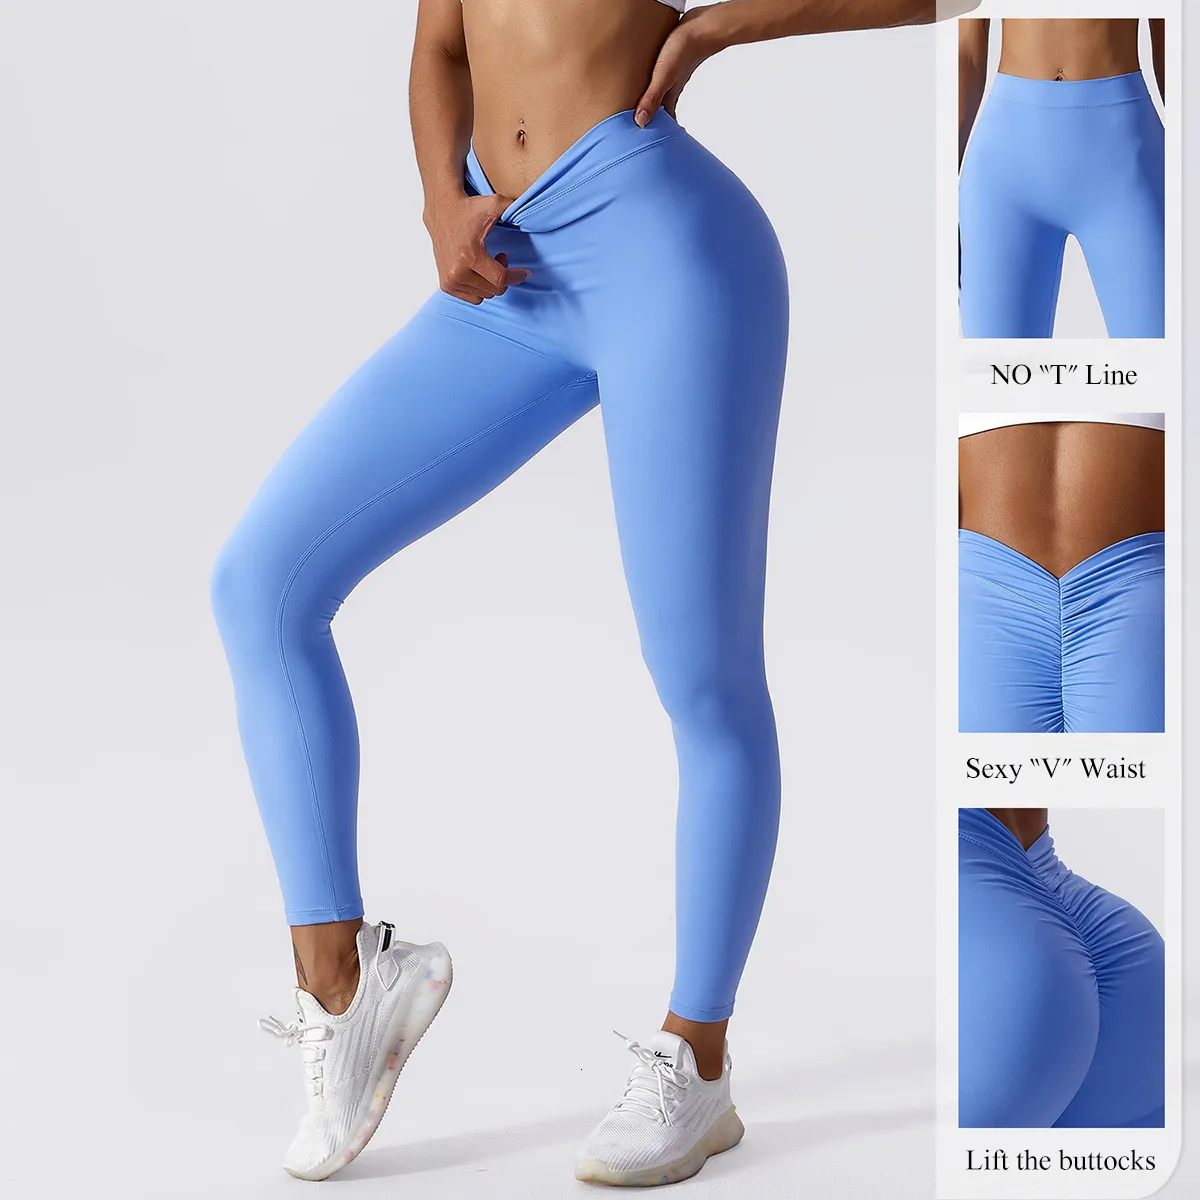 Sexy V Waist Scrunch Butt  Gym Leggings For Women Push Up, Naked  Feeling, Yoga Pants For Workout And Fitness Style #230918 From Bai04, $8.45